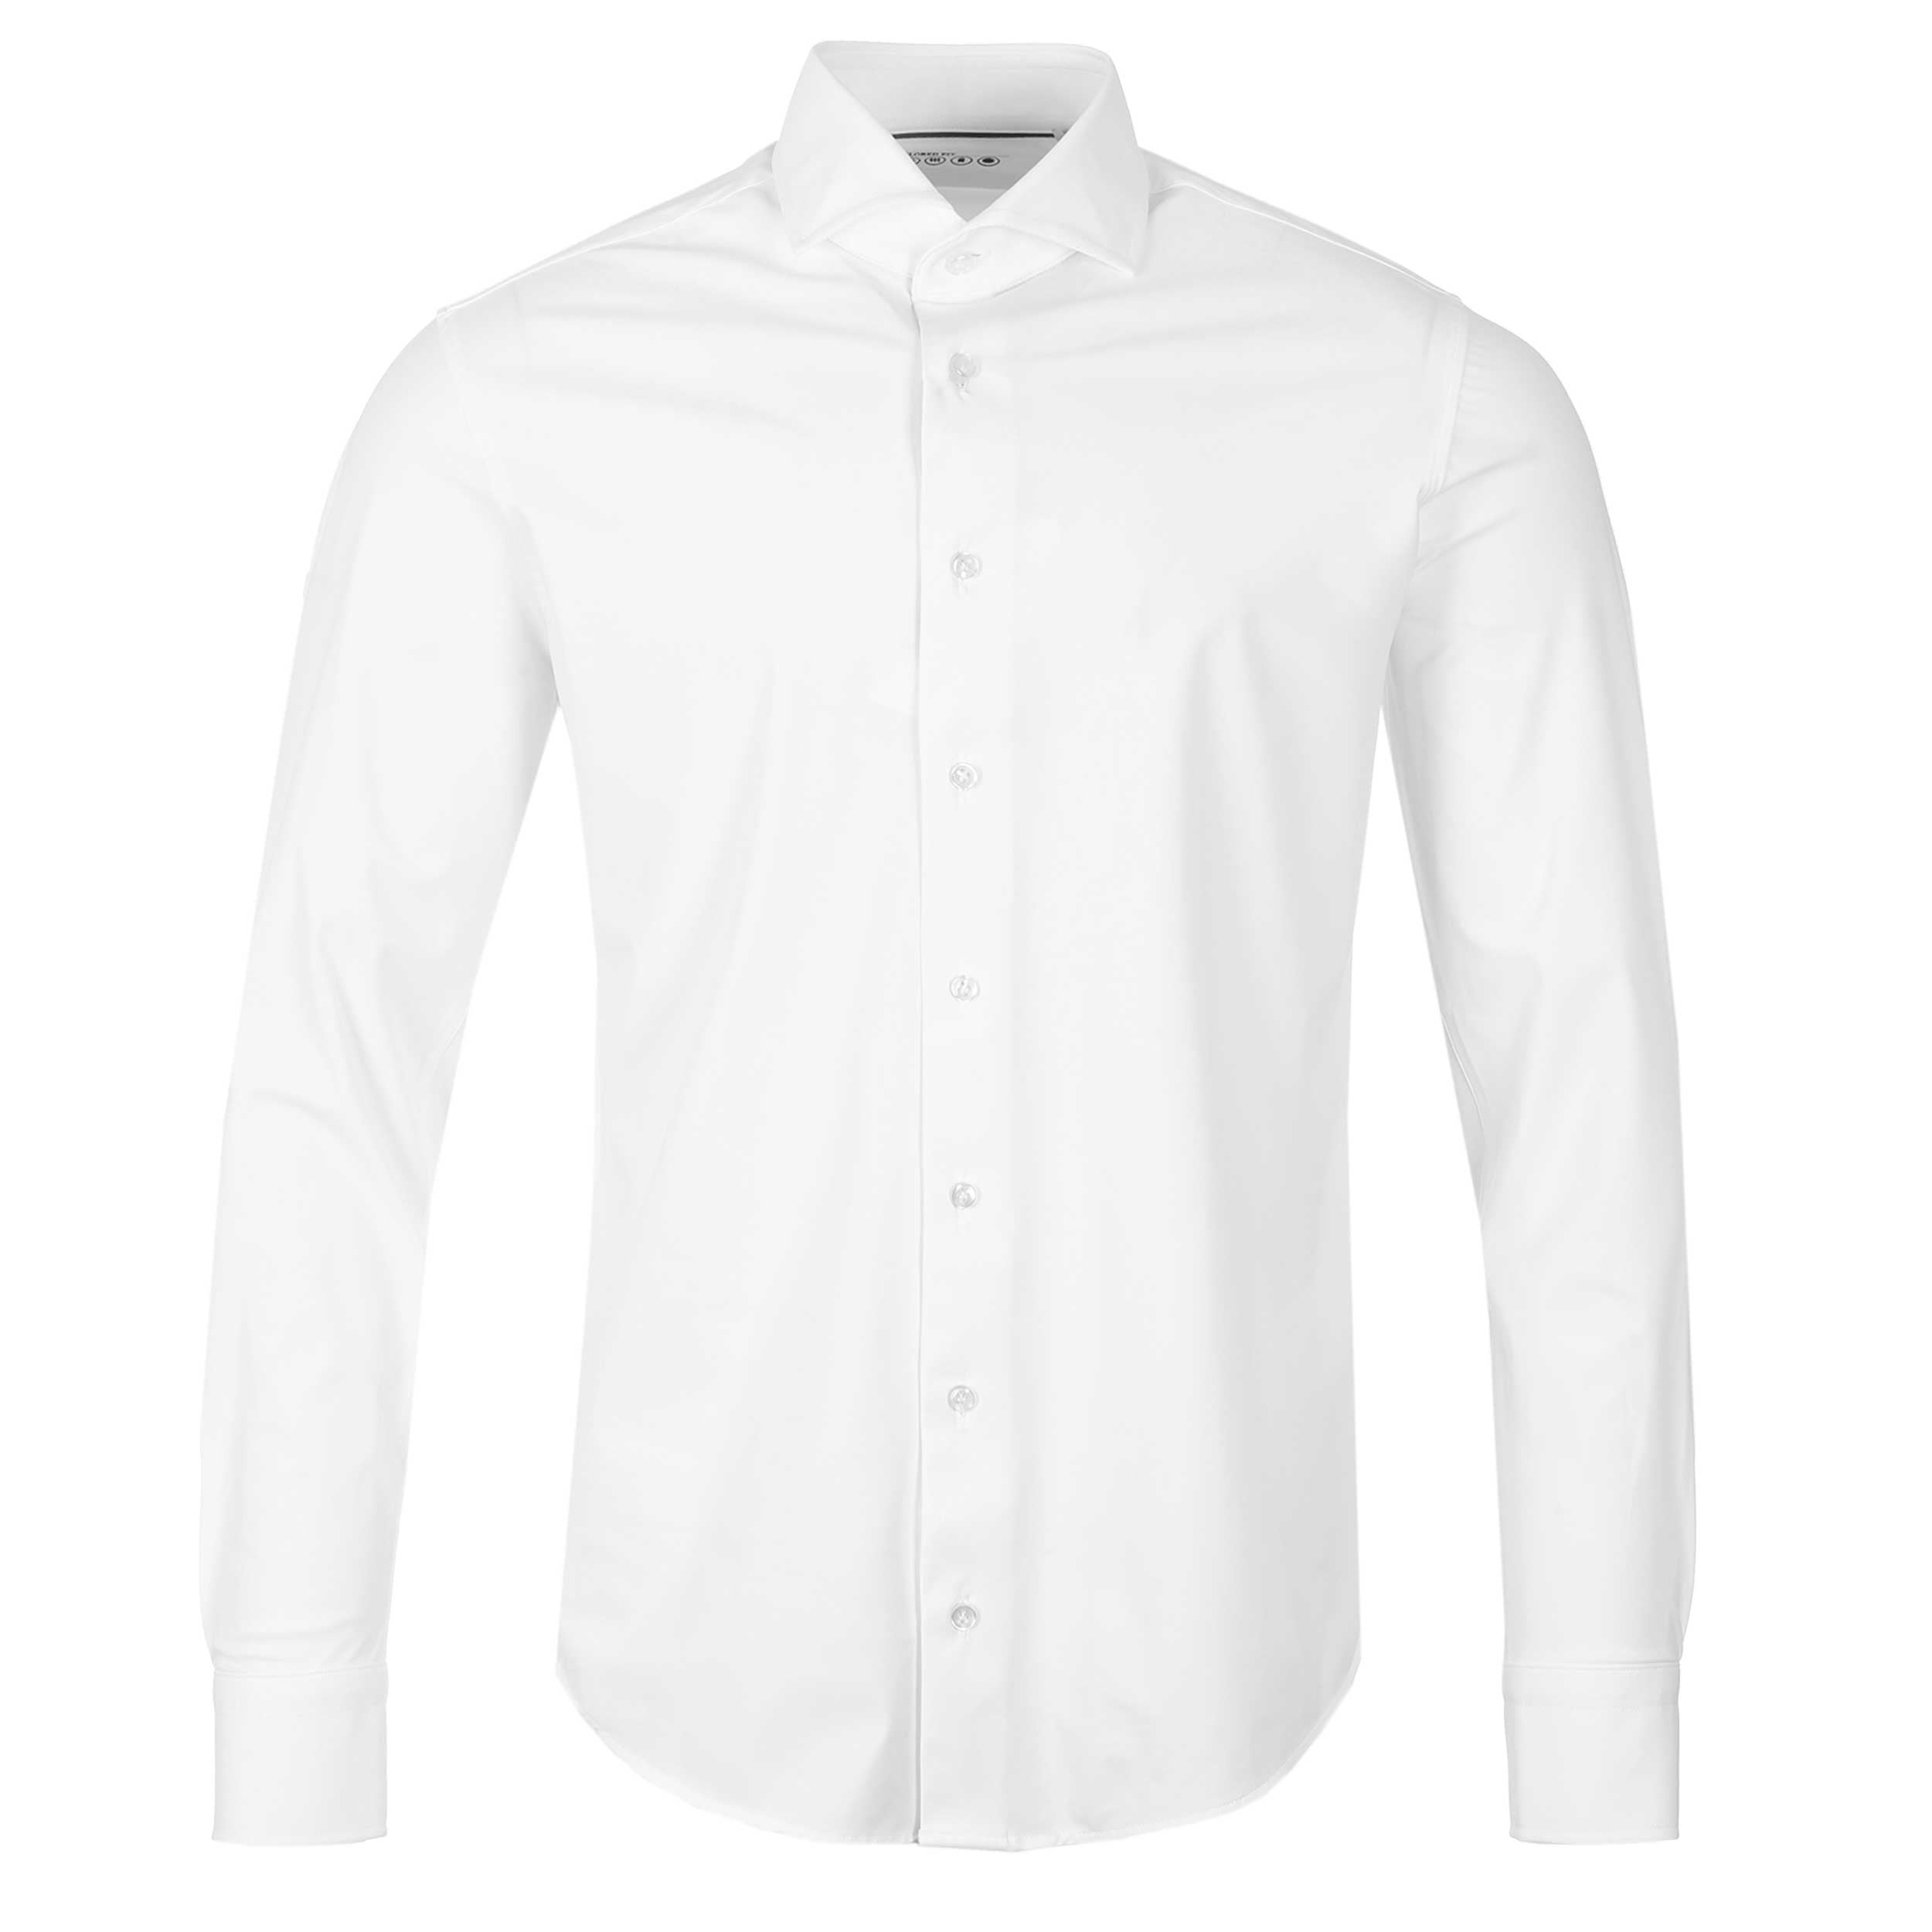 Thomas Maine Tech Luxe Stretch Shirt in White